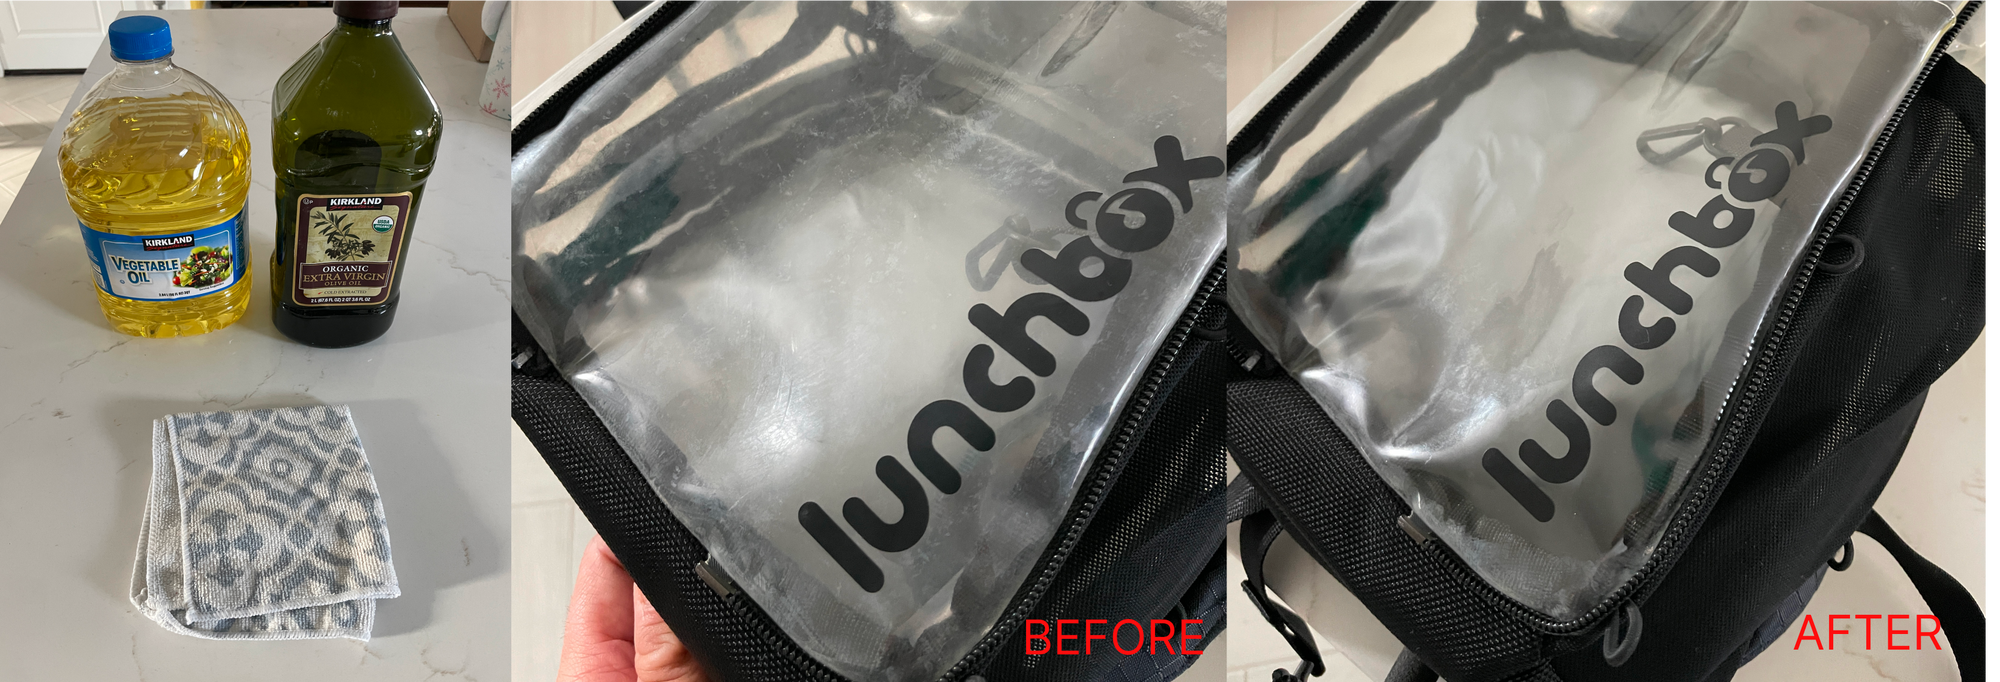 How to Restore the Clarity in Your Clear Packs